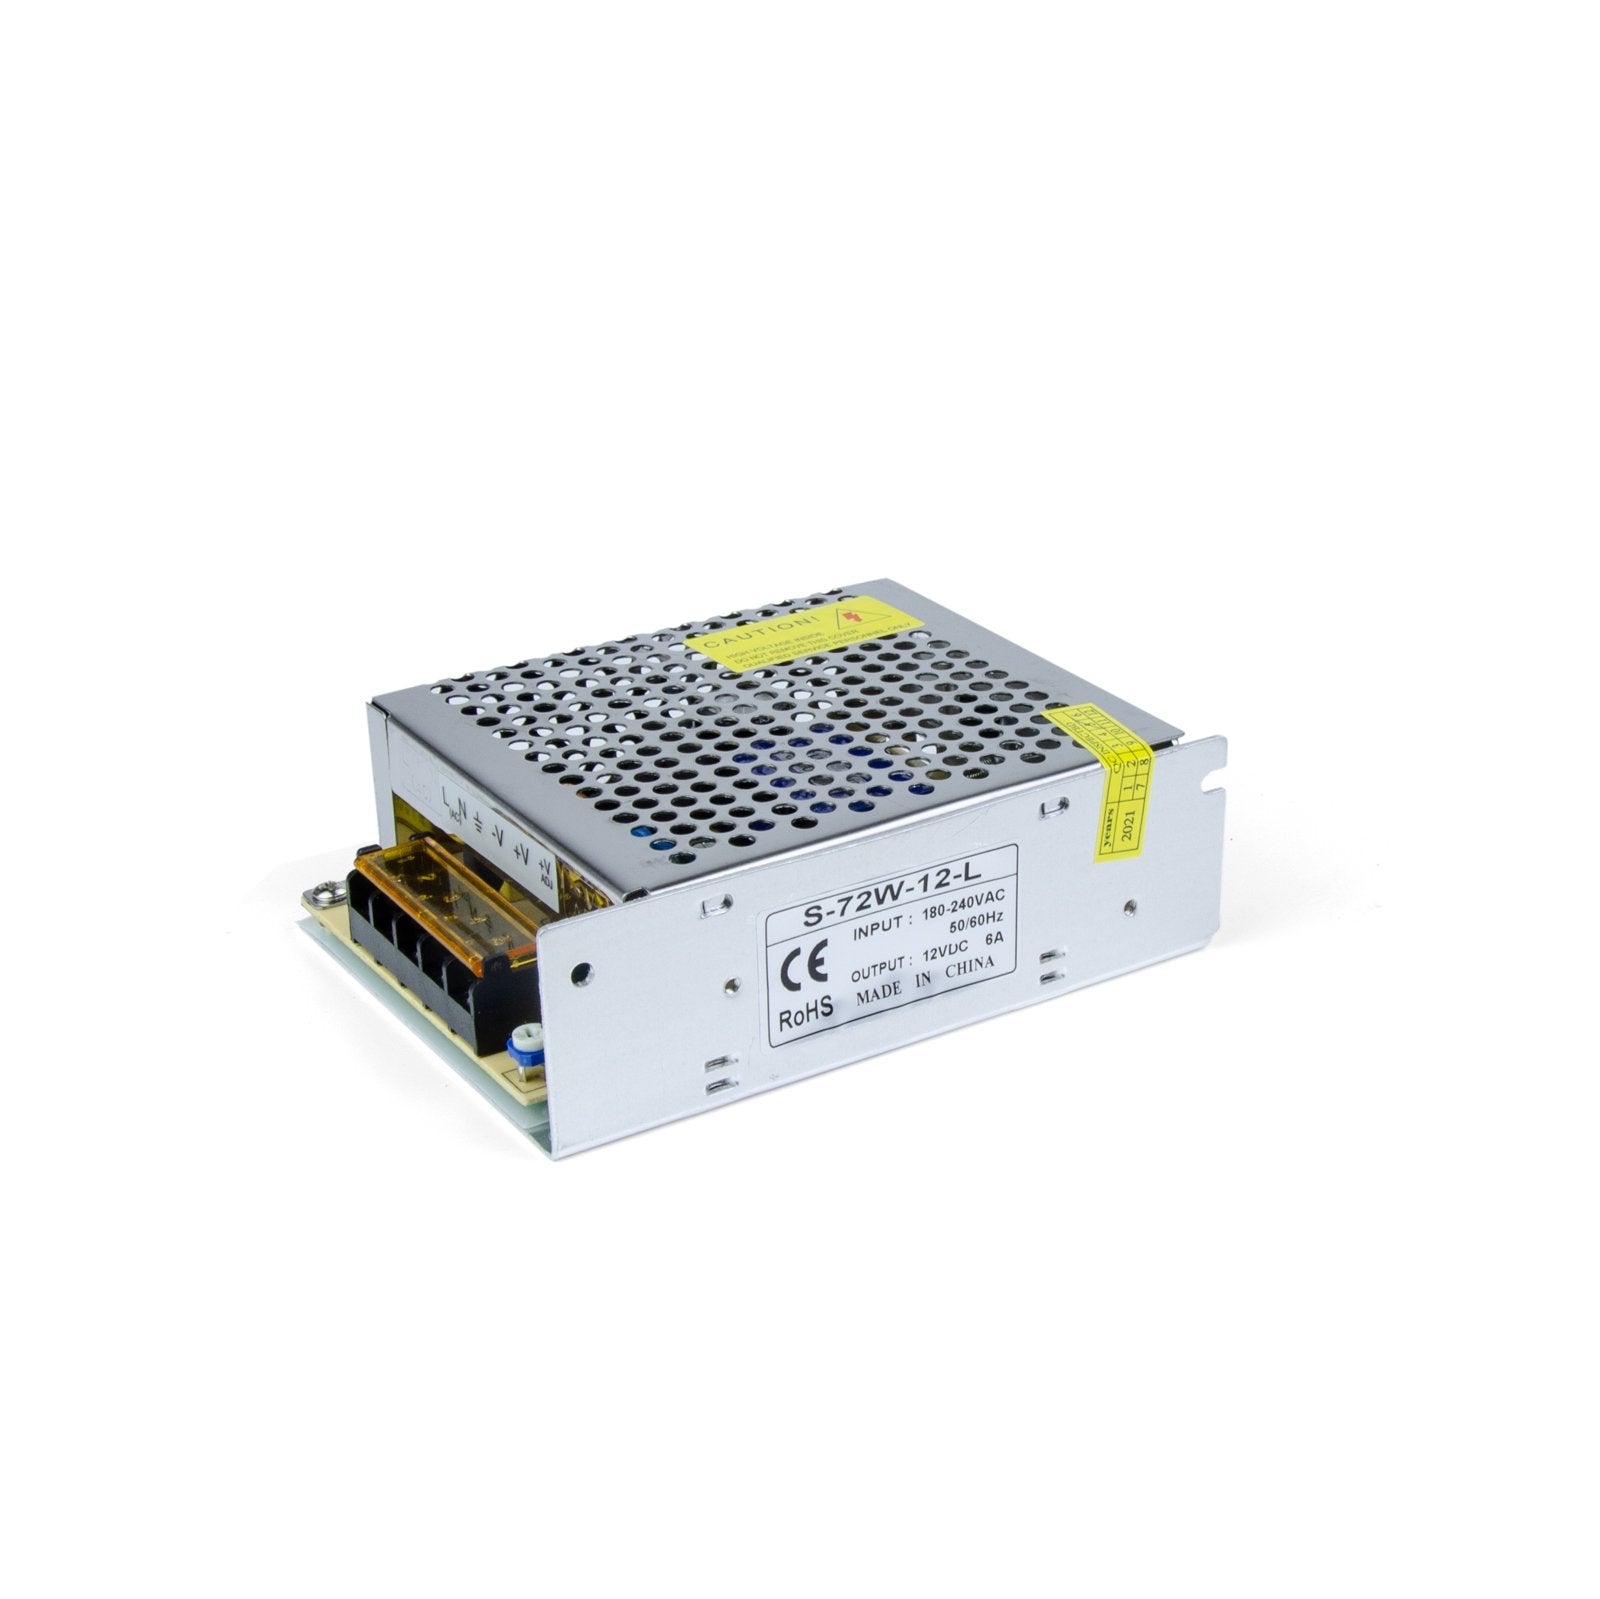 G.W.S LED Wholesale LED Drivers/LED Power Supplies IP20 (Non-Waterproof) 12V 6A 72W LED Driver